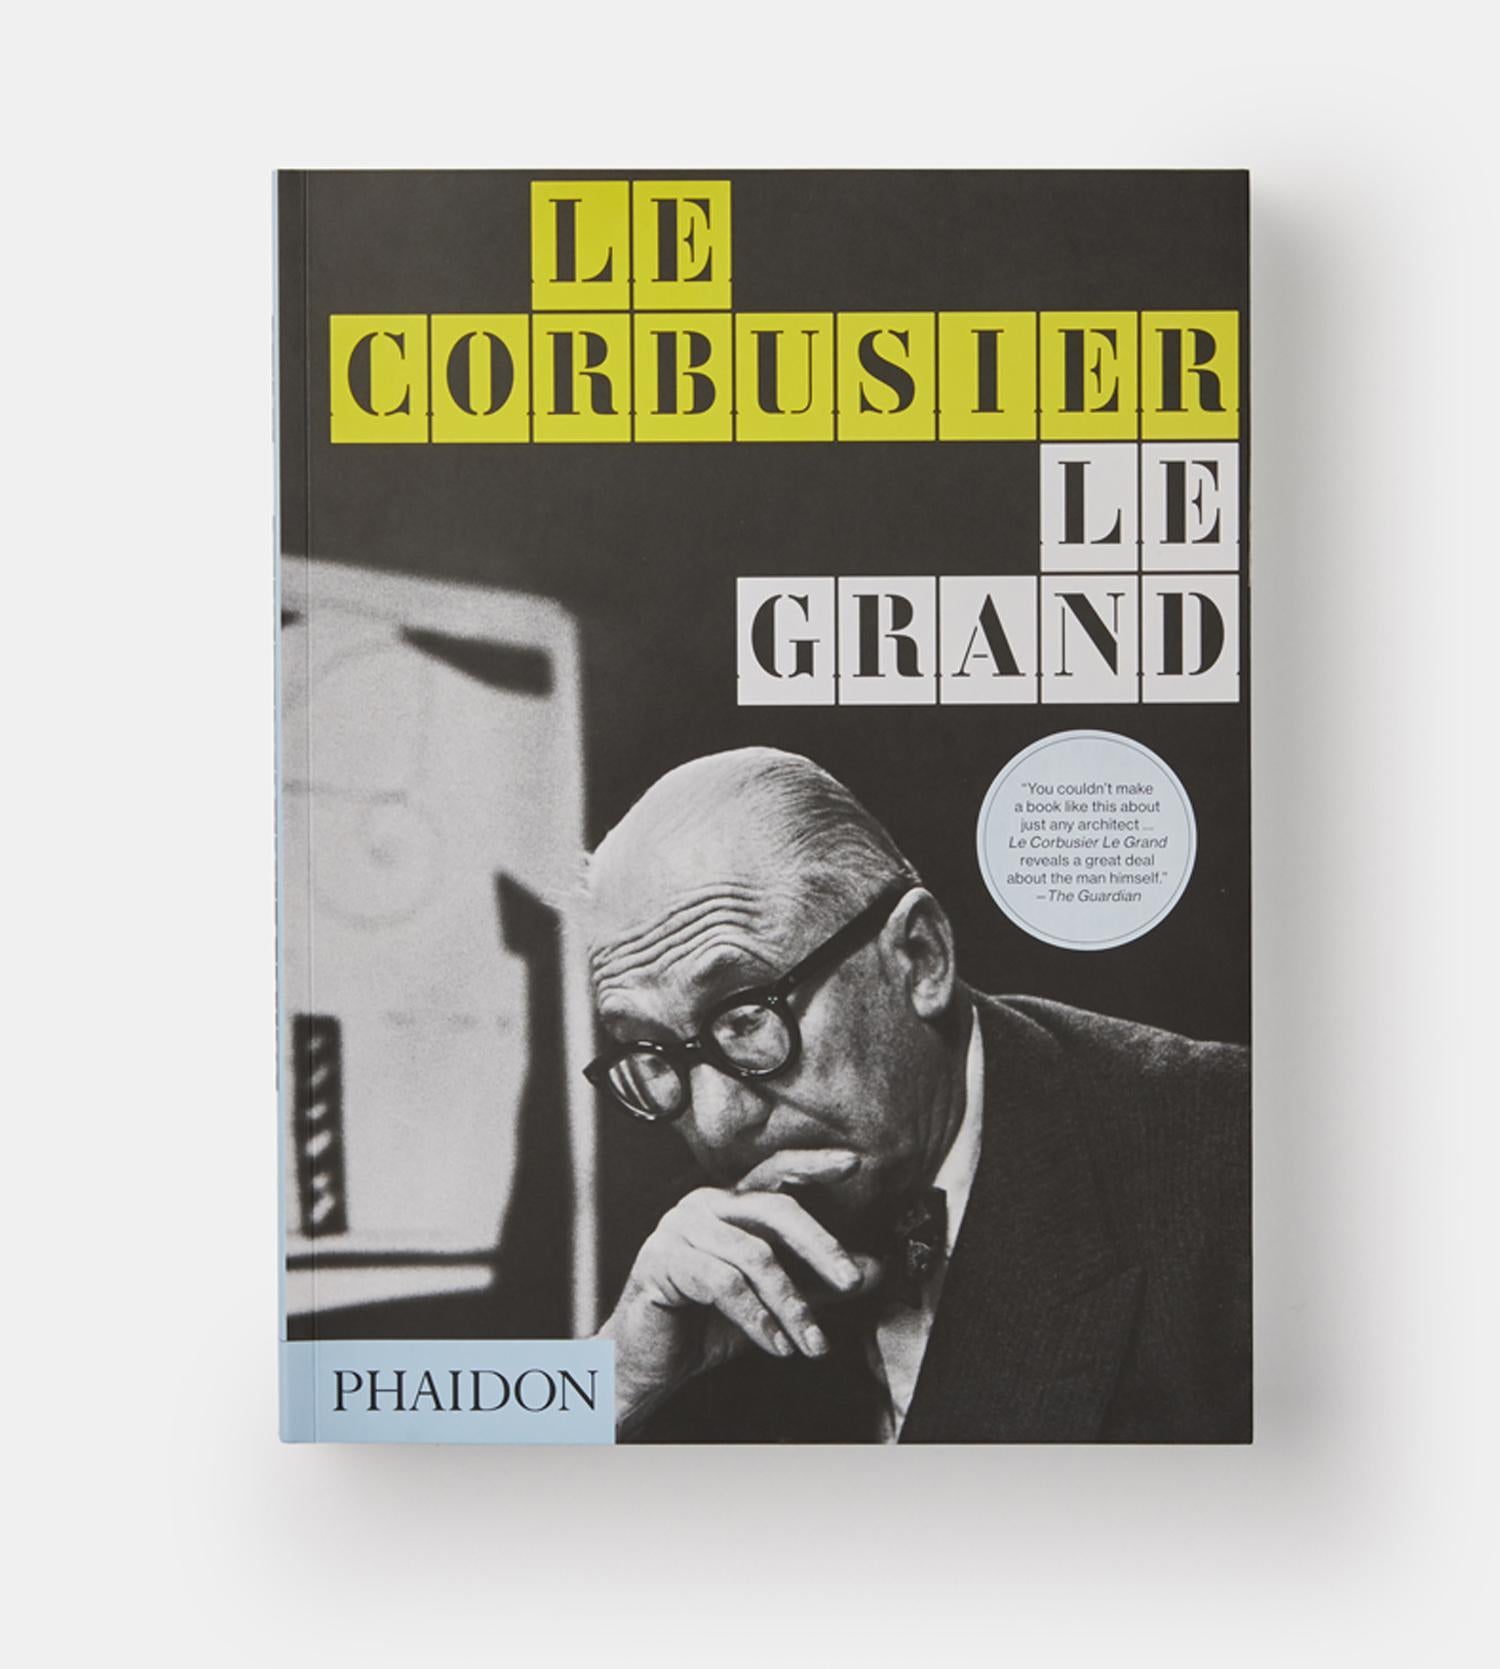 A spectacular visual biography of the life and work of Le Corbusier, one of the 20th century's most influential architects
A decade after its first publication, the bestselling monograph Le Corbusier Le Grand is finally available in a new paperback